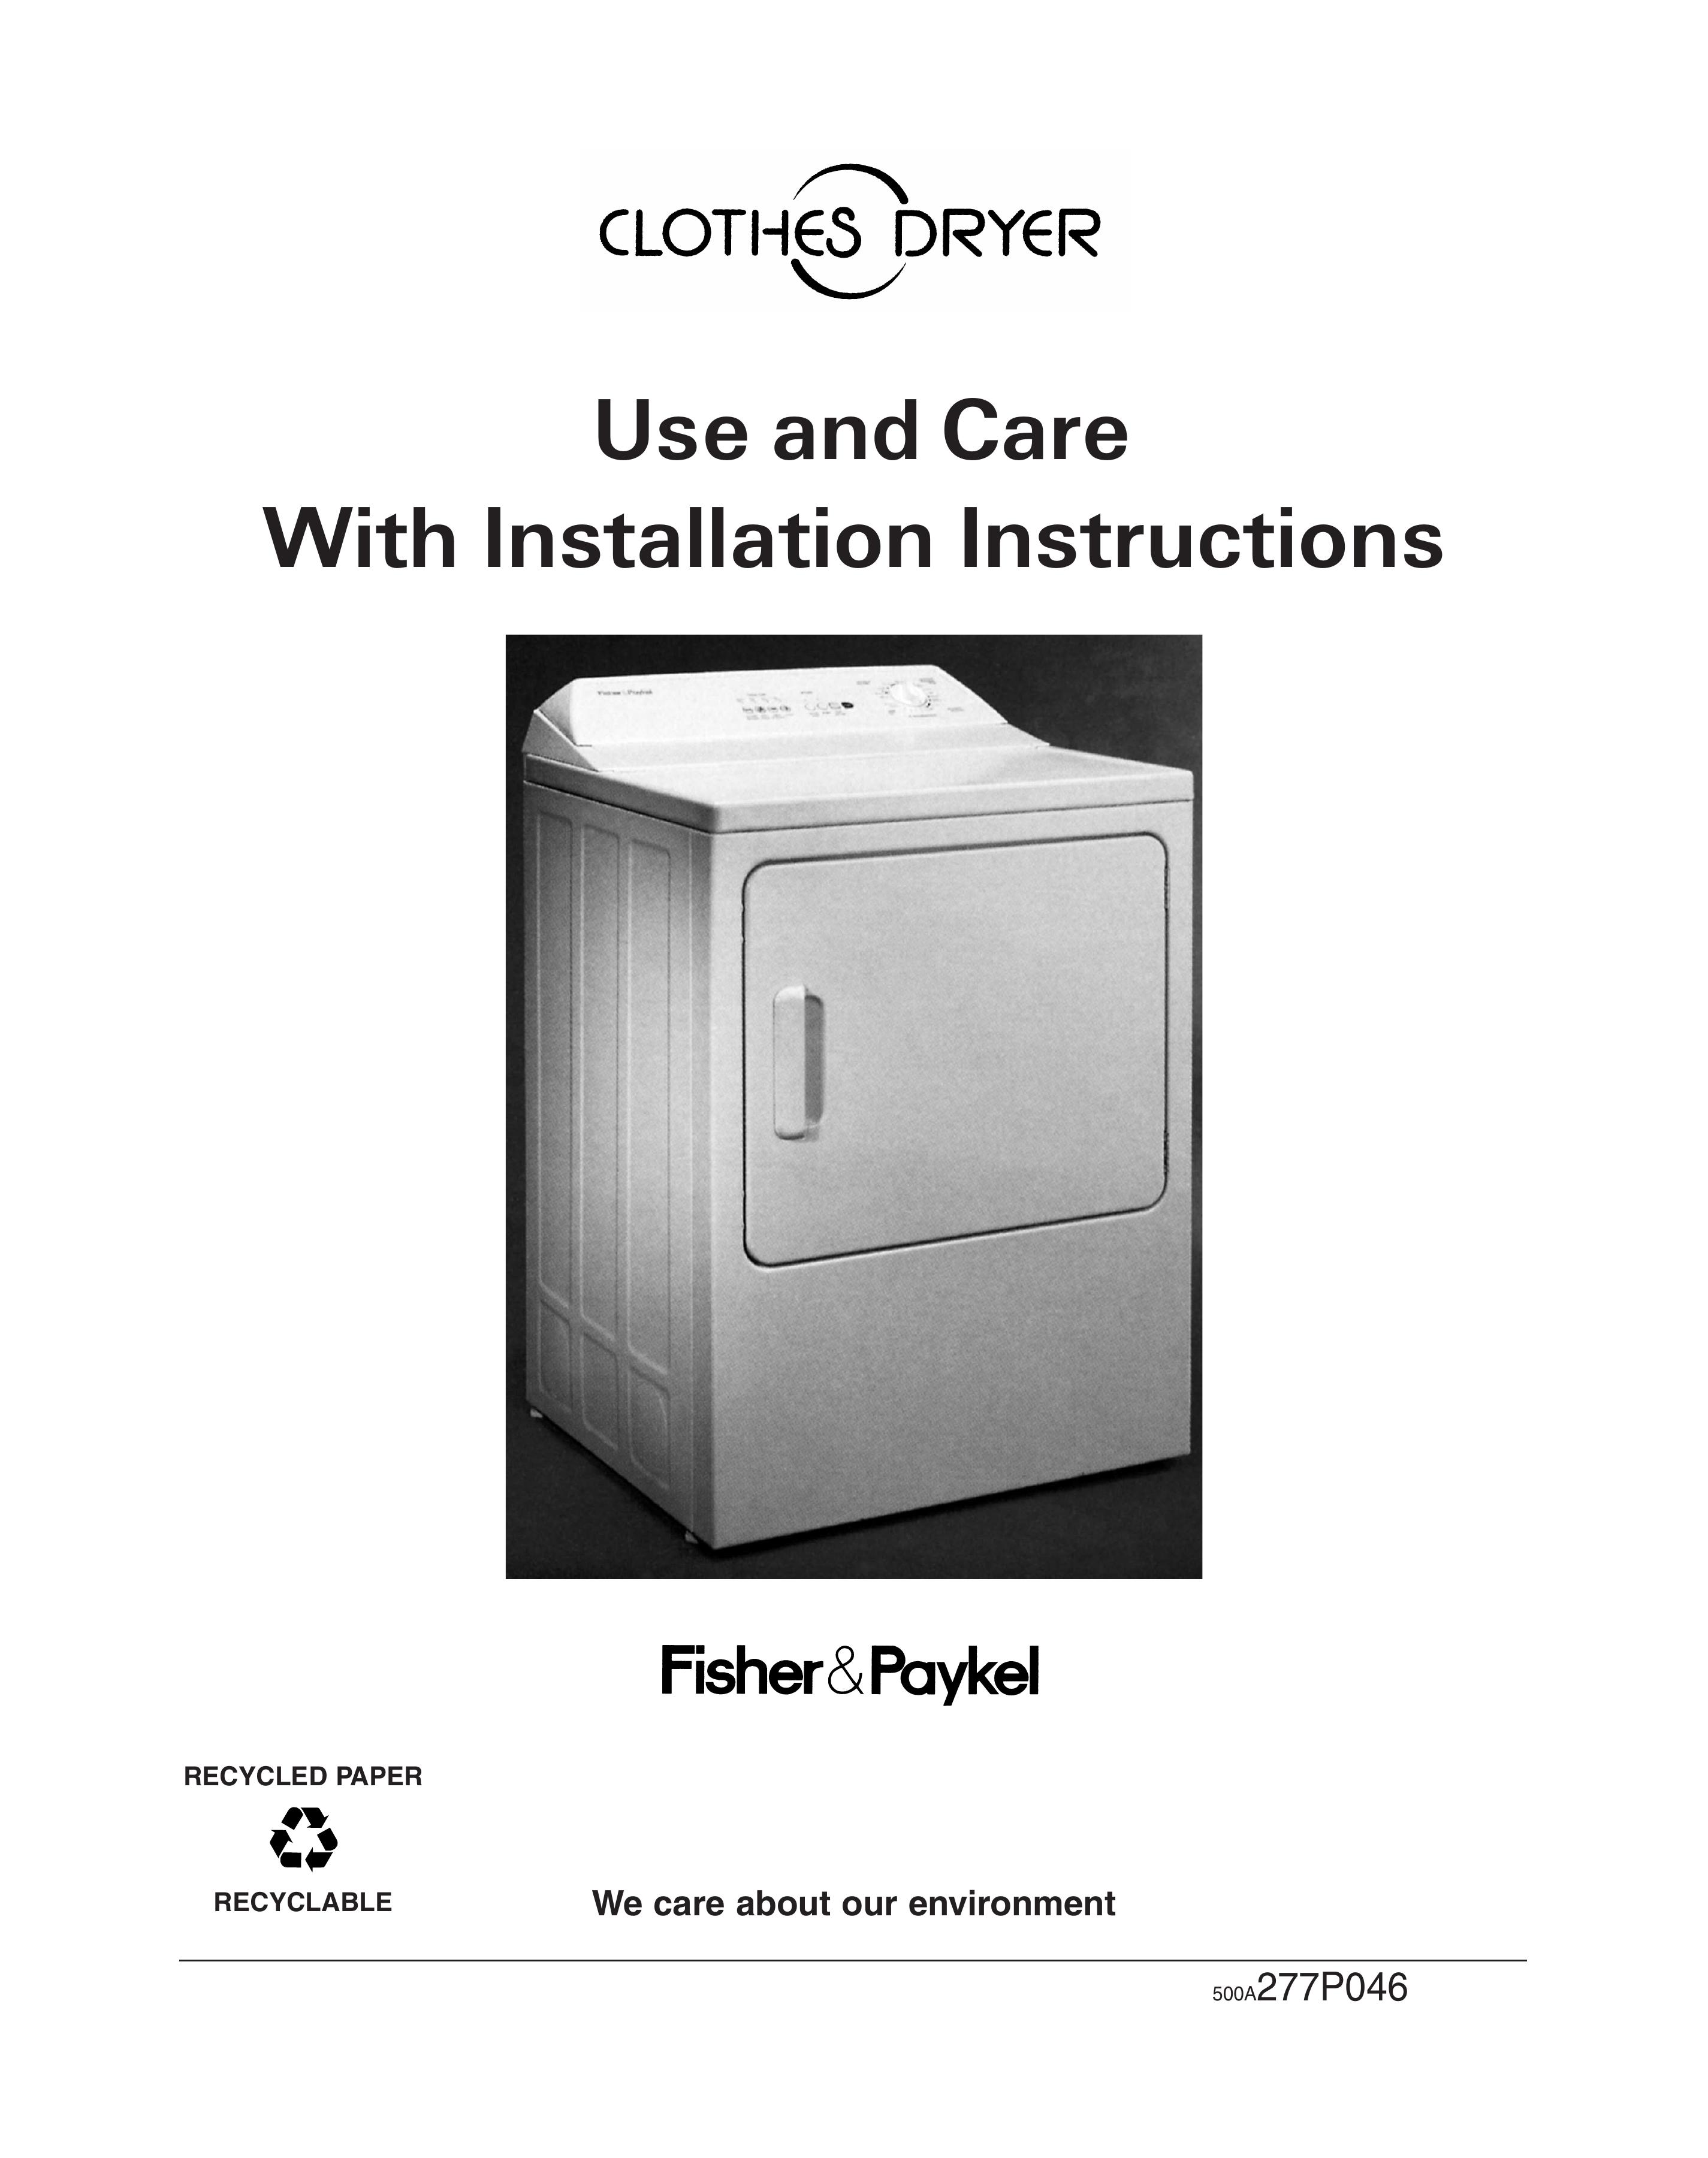 Fisher & Paykel DE08 Clothes Dryer User Manual